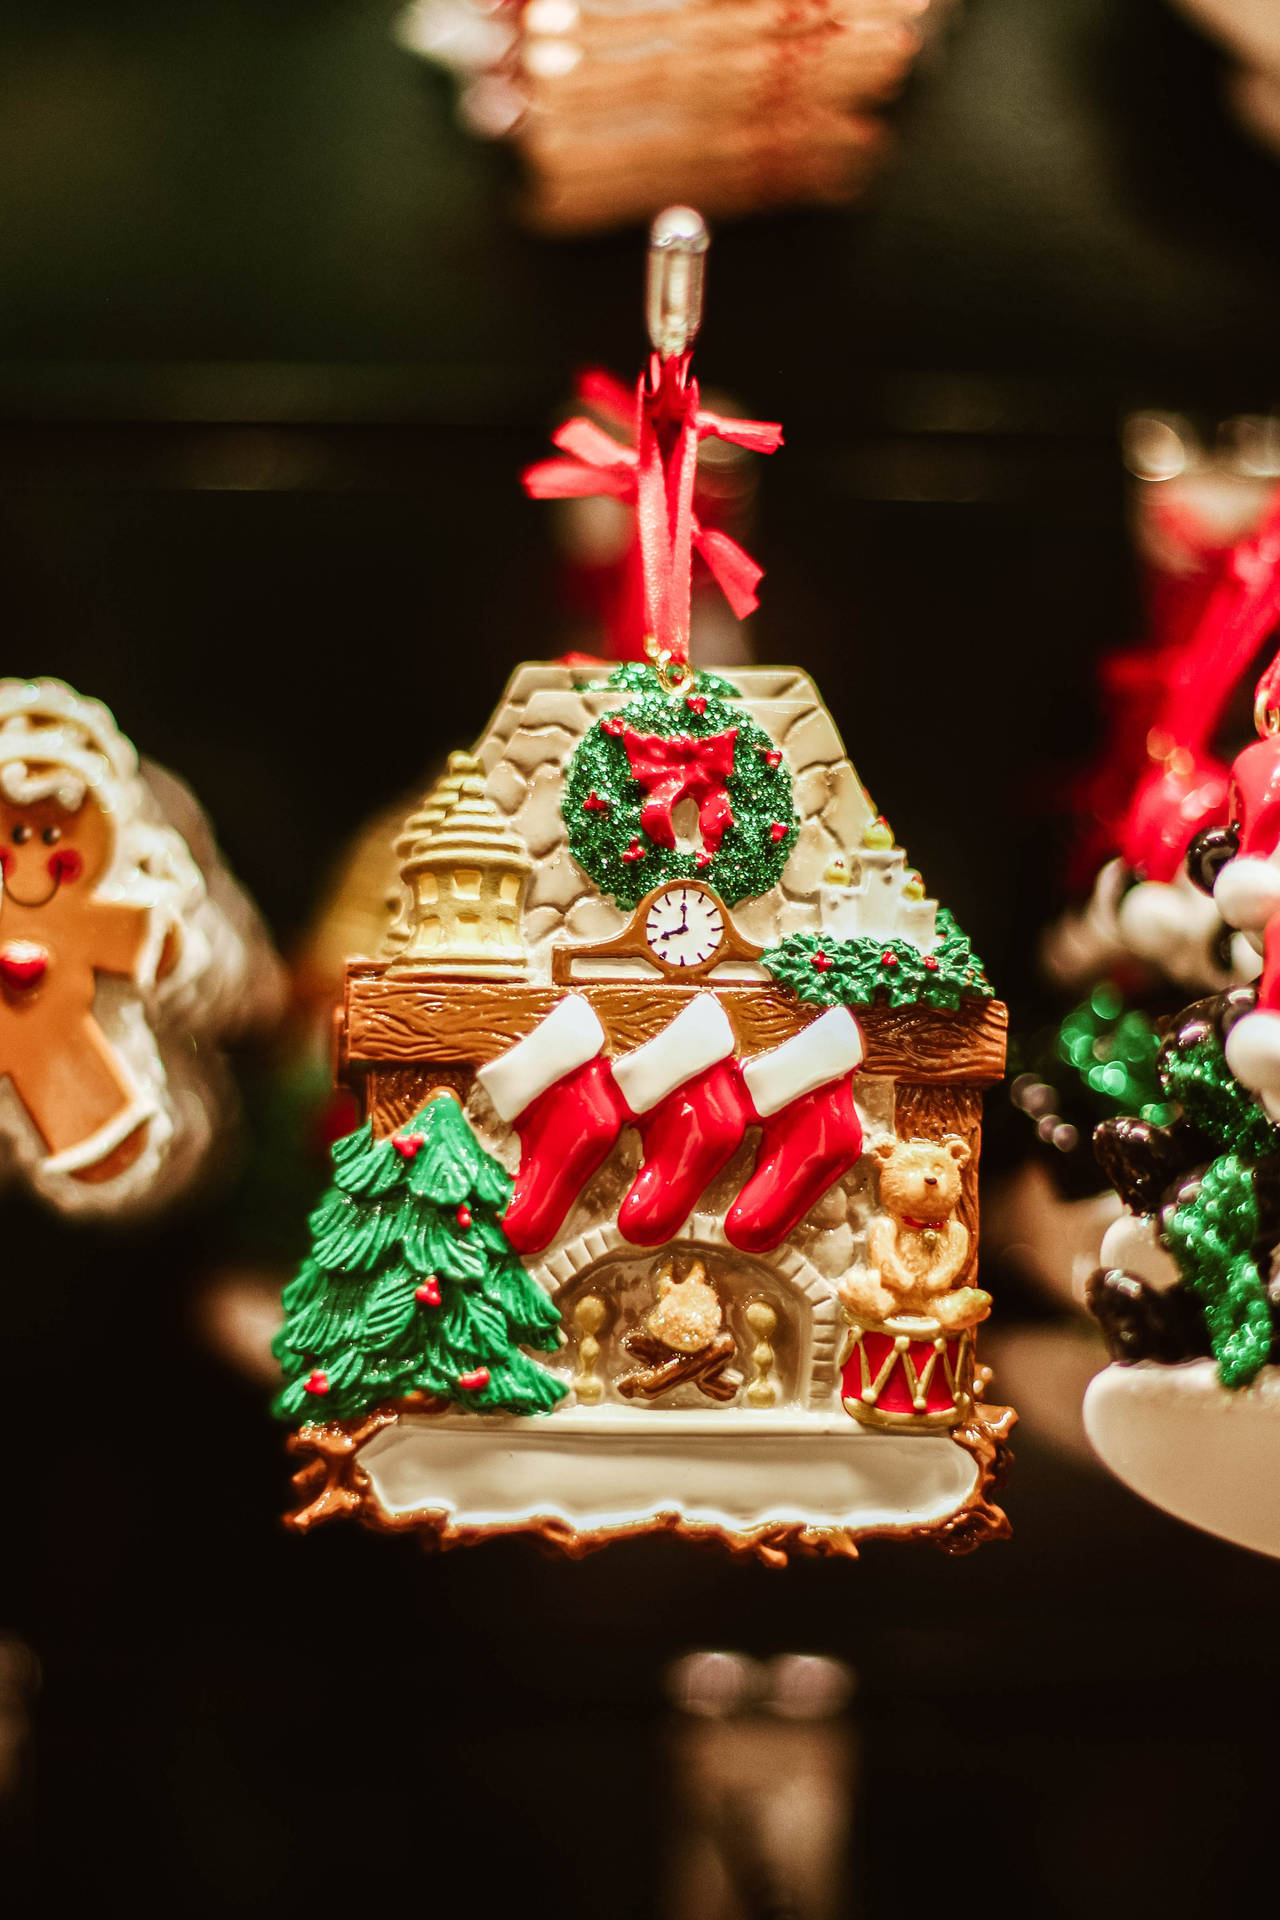 Welcome the holiday season in your home with a festive Gingerbread House Christmas Tree Wallpaper